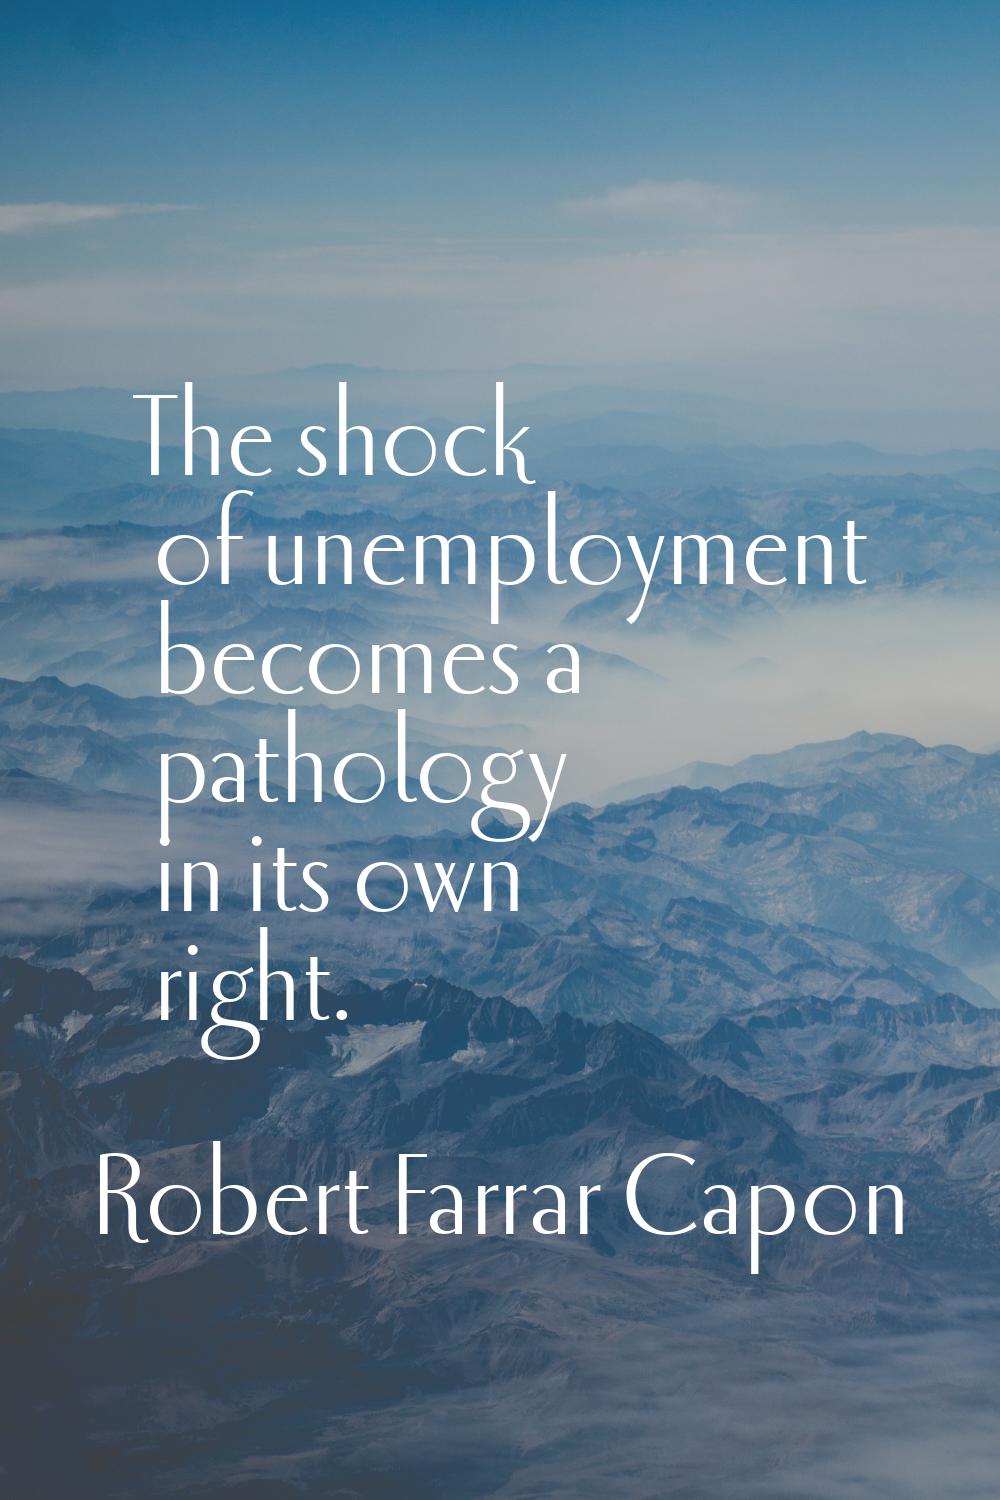 The shock of unemployment becomes a pathology in its own right.